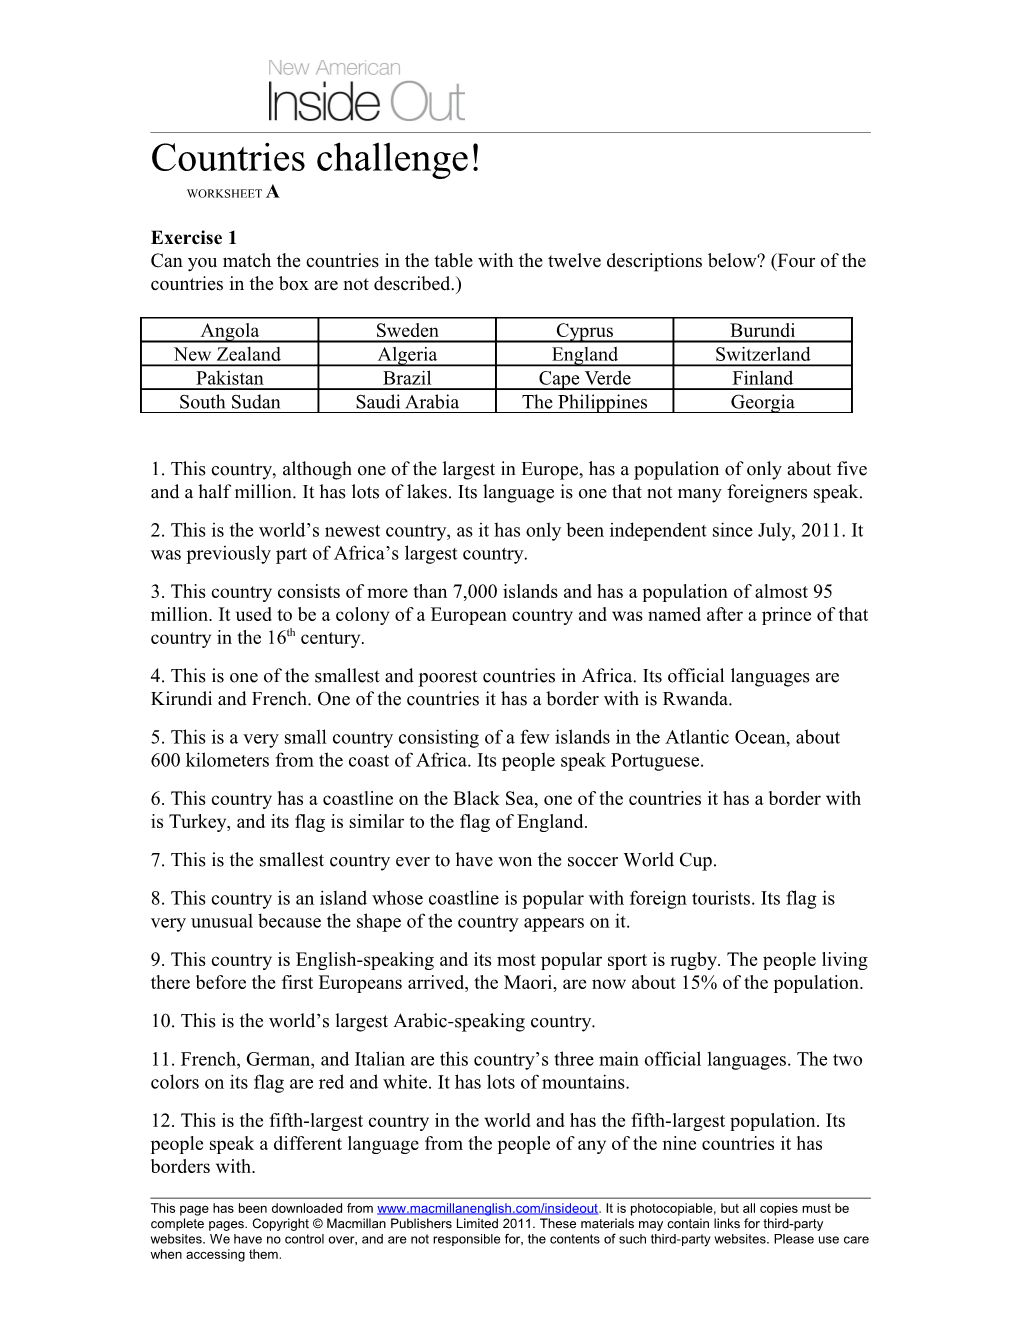 Countries Challenge! Worksheet A